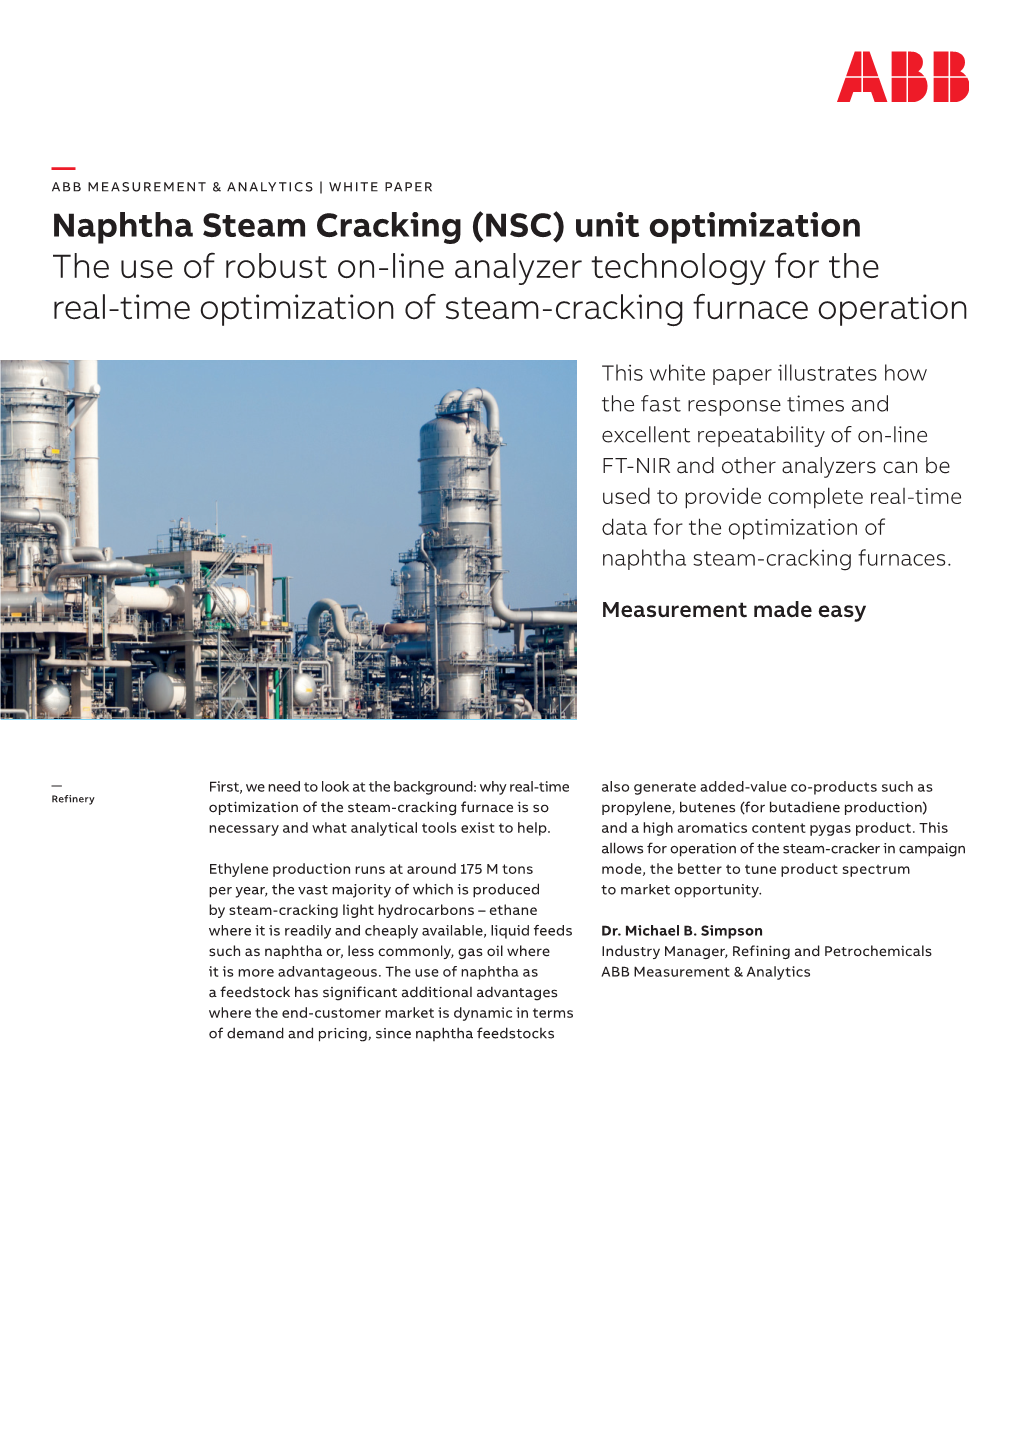 Naphtha Steam Cracking (NSC) Unit Optimization the Use of Robust On-Line Analyzer Technology for the Real-Time Optimization of Steam-Cracking Furnace Operation